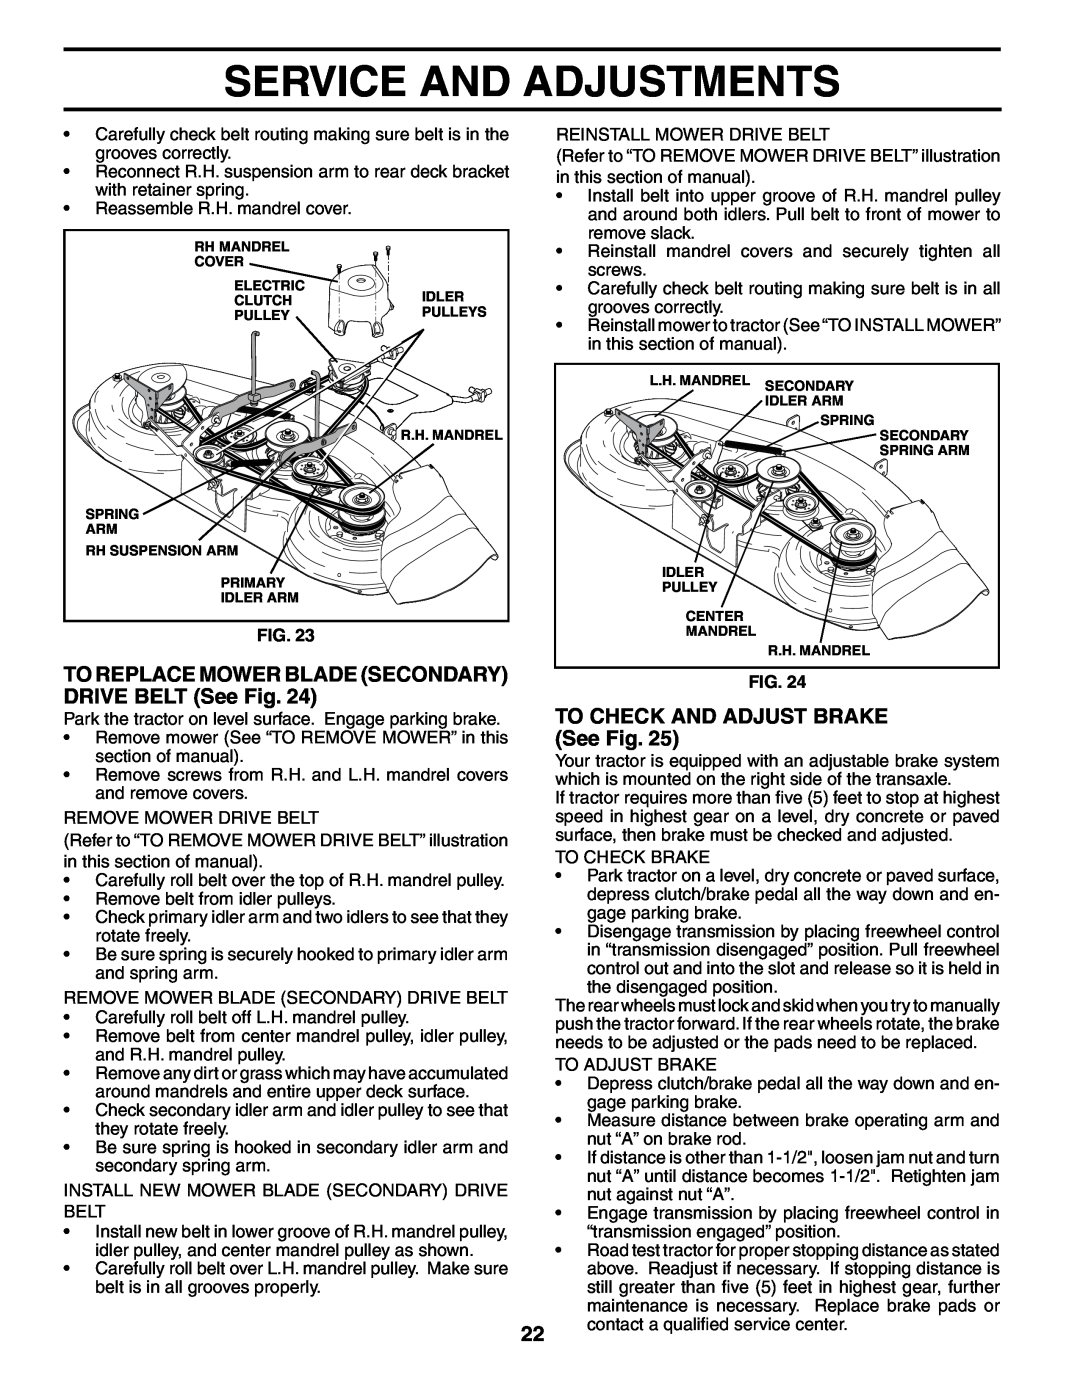 Poulan POGT20H48STA manual TO REPLACE MOWER BLADE SECONDARY DRIVE BELT See Fig, TO CHECK AND ADJUST BRAKE See Fig 